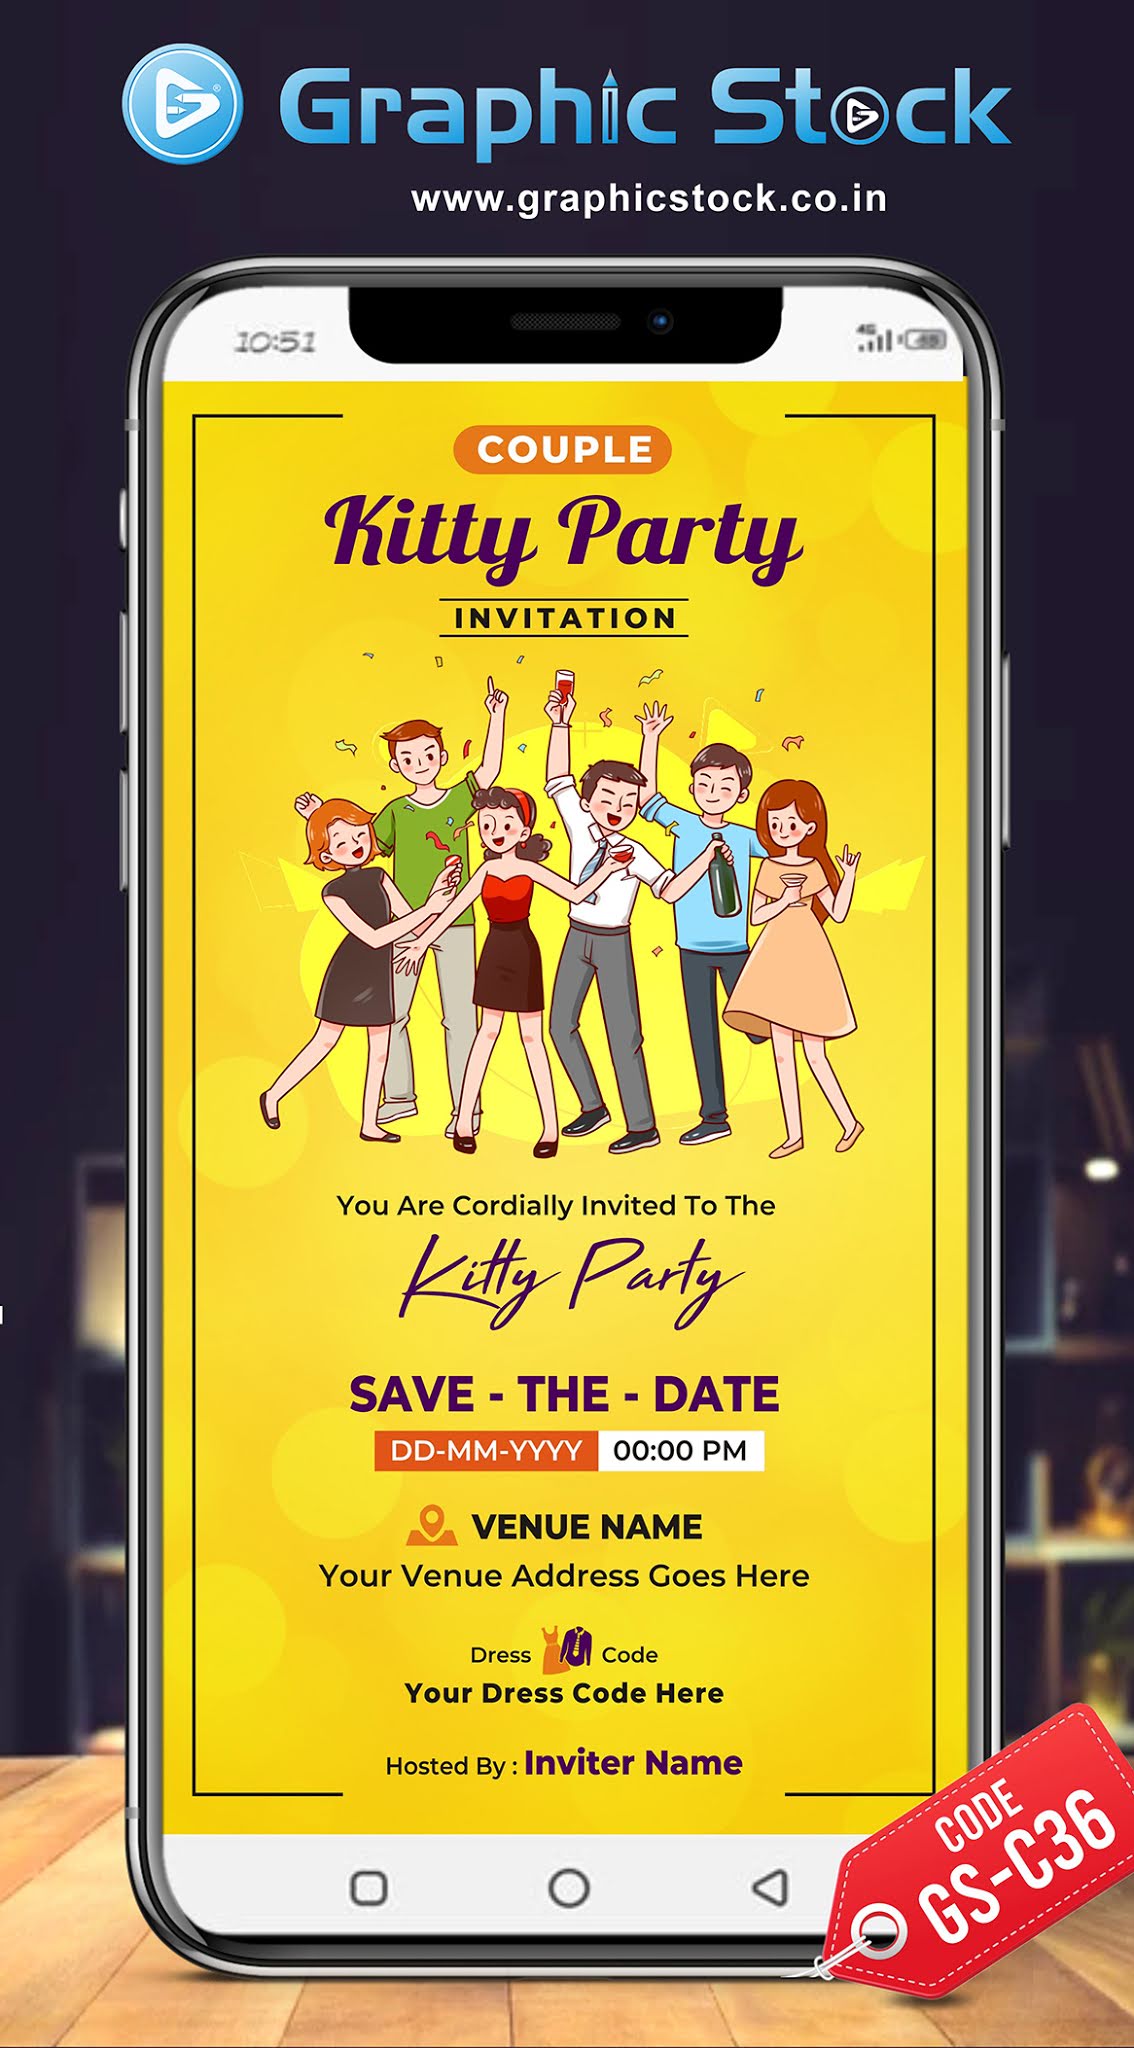 couple-kitty-party-invitation-card-m-91-9807244177